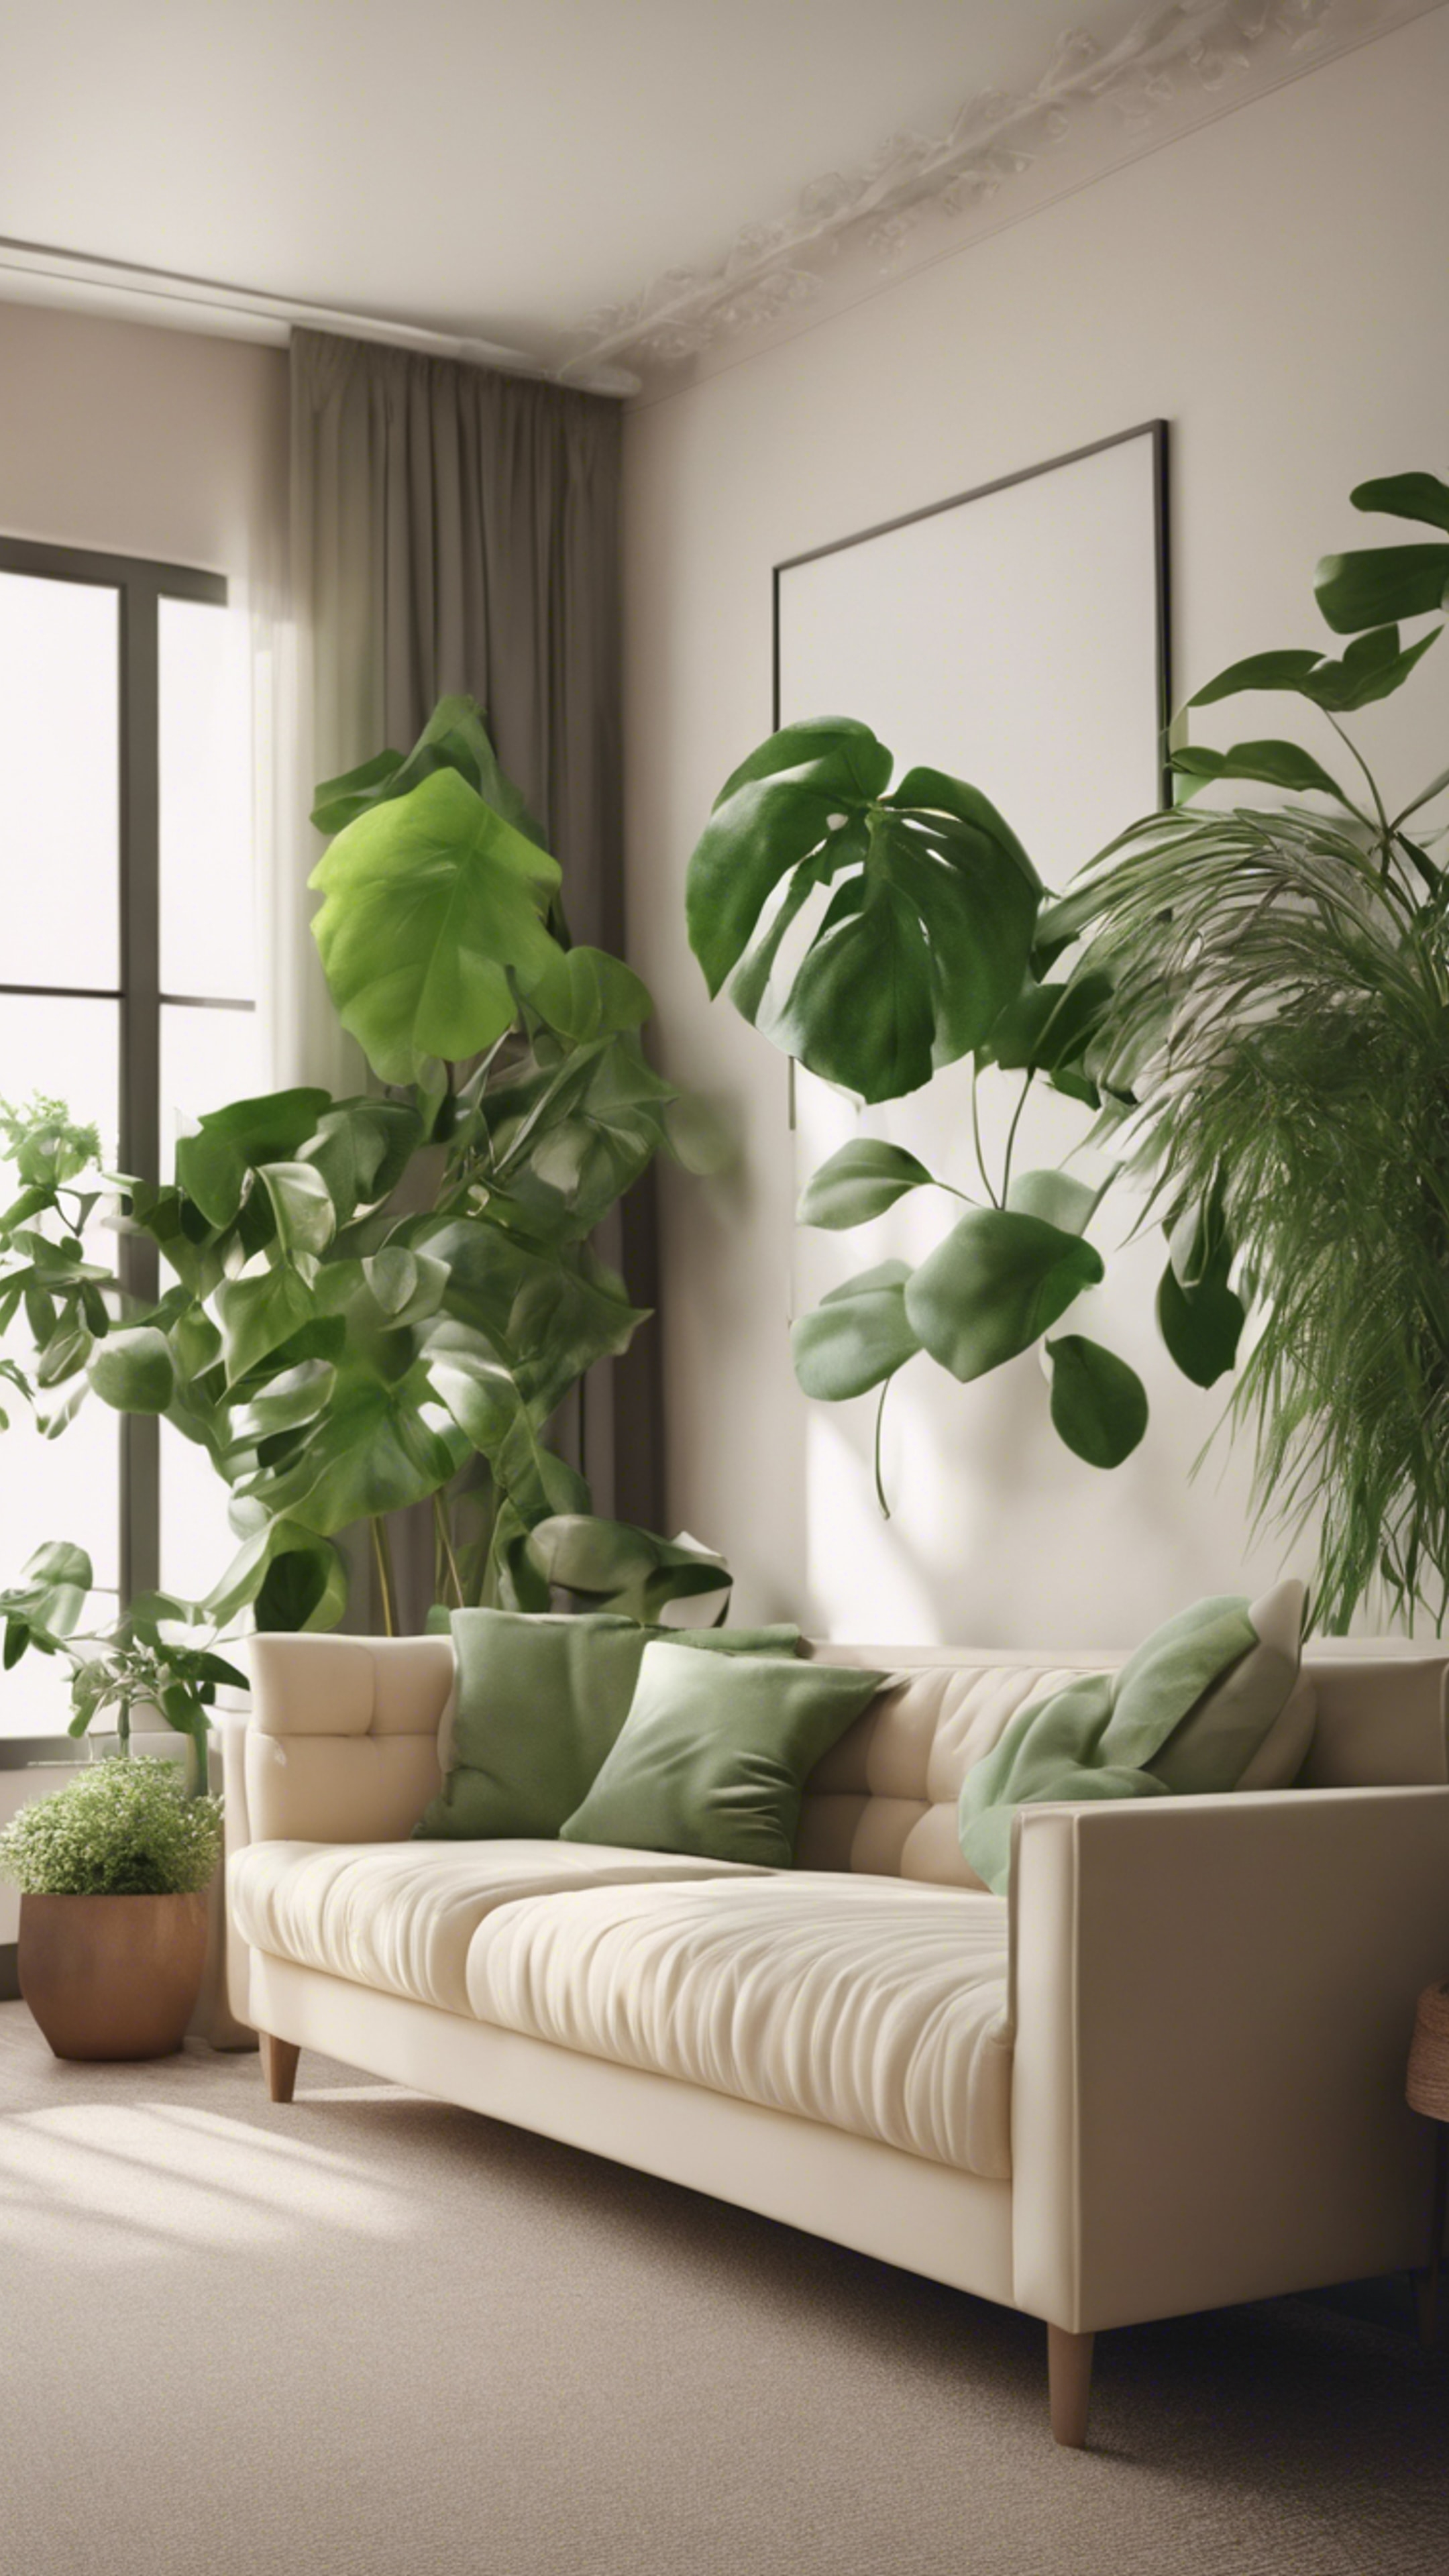 A simplistic living room featuring a cream couch contrasted with a natural green aesthetic of indoor plants 벽지[57c4f329650745189cc4]